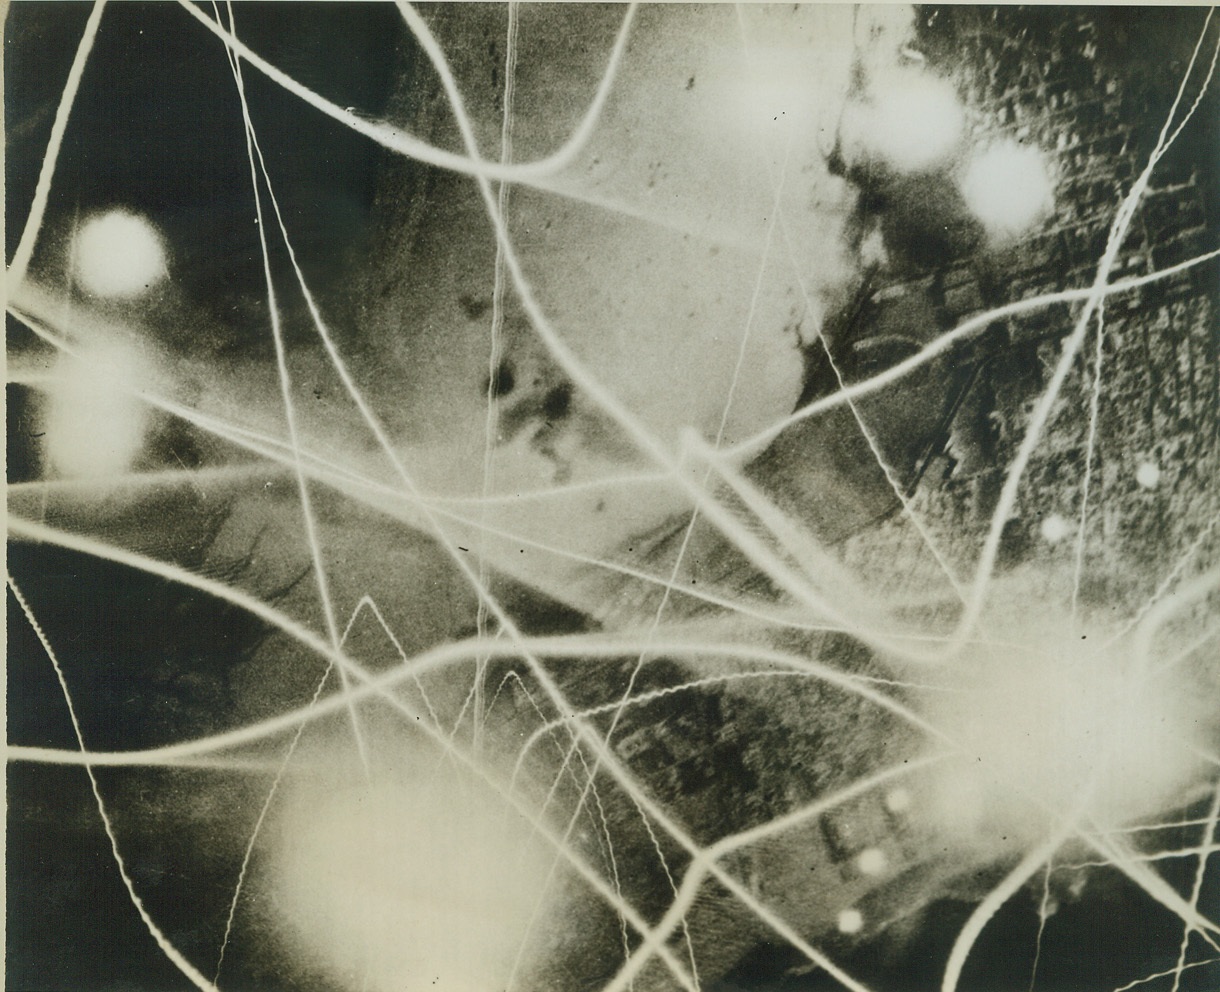 ALLIED BOMBERS ATTACK BENGHAZI BY NIGHT, 8/6/1942. This unusual photo, showing a criss-cross fire of tracer bullets, bomb flashes and brilliant white flashes of exploding anti-aircraft shells, was taken from a United Nations bomber during a night attack on the port of Benghazi. (Passed by censors.) Credit: ACME;